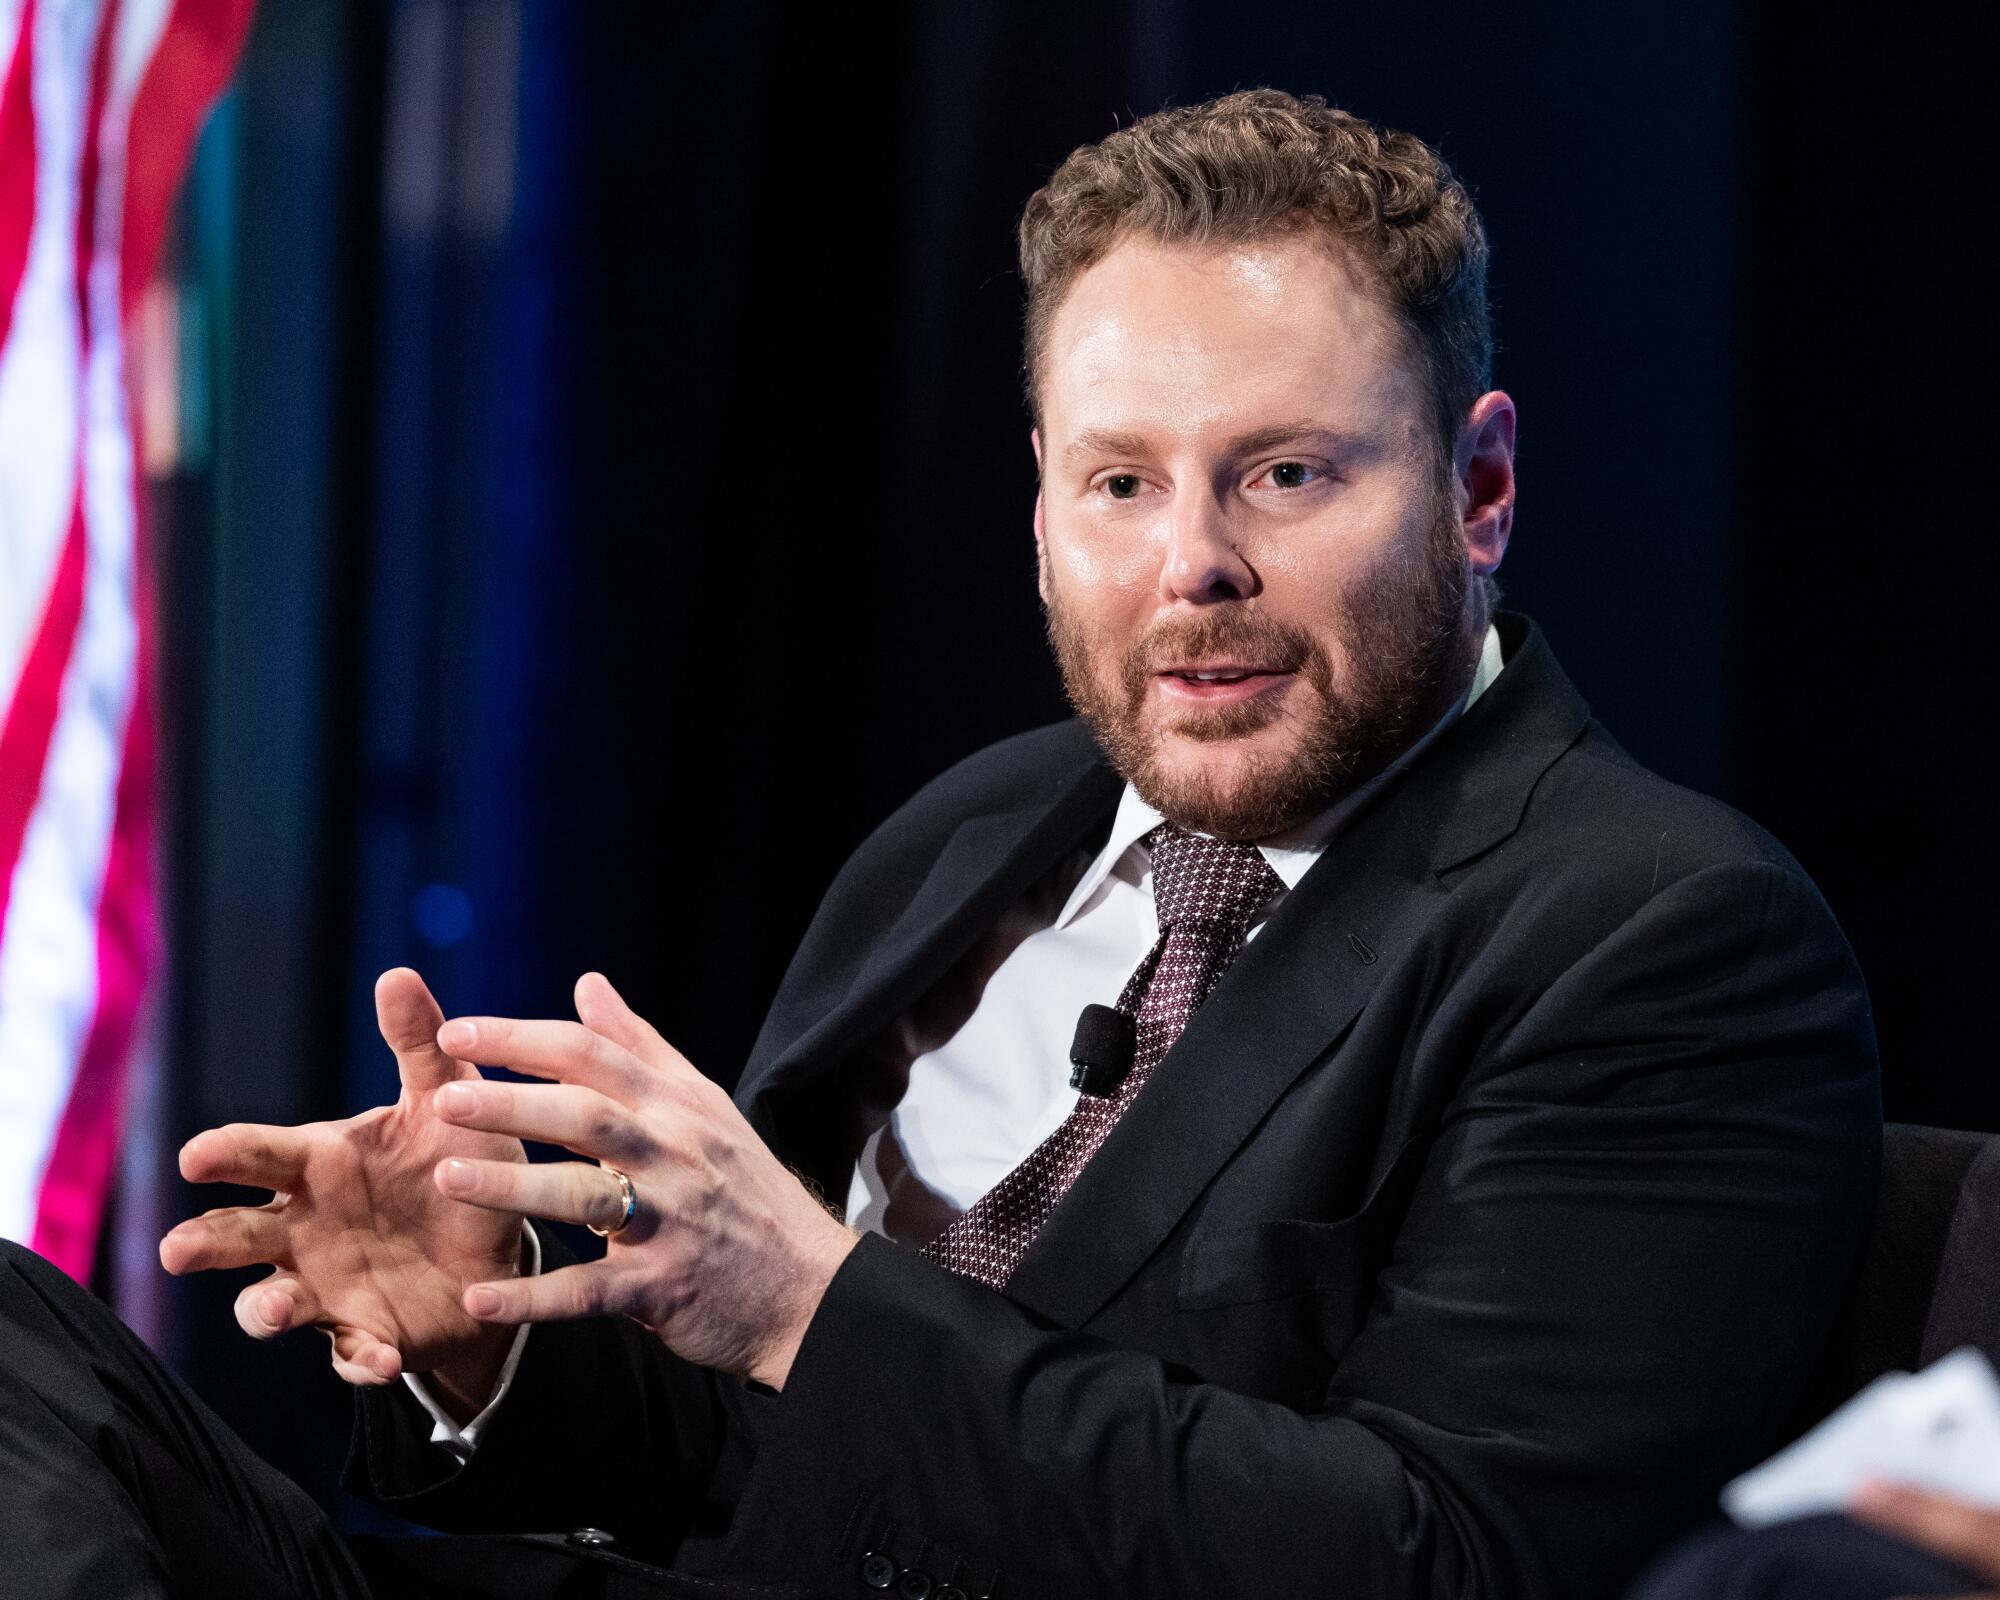 The Opportunity Zone program was the vision of Silicon Valley billionaire Sean Parker, shown here in 2018.